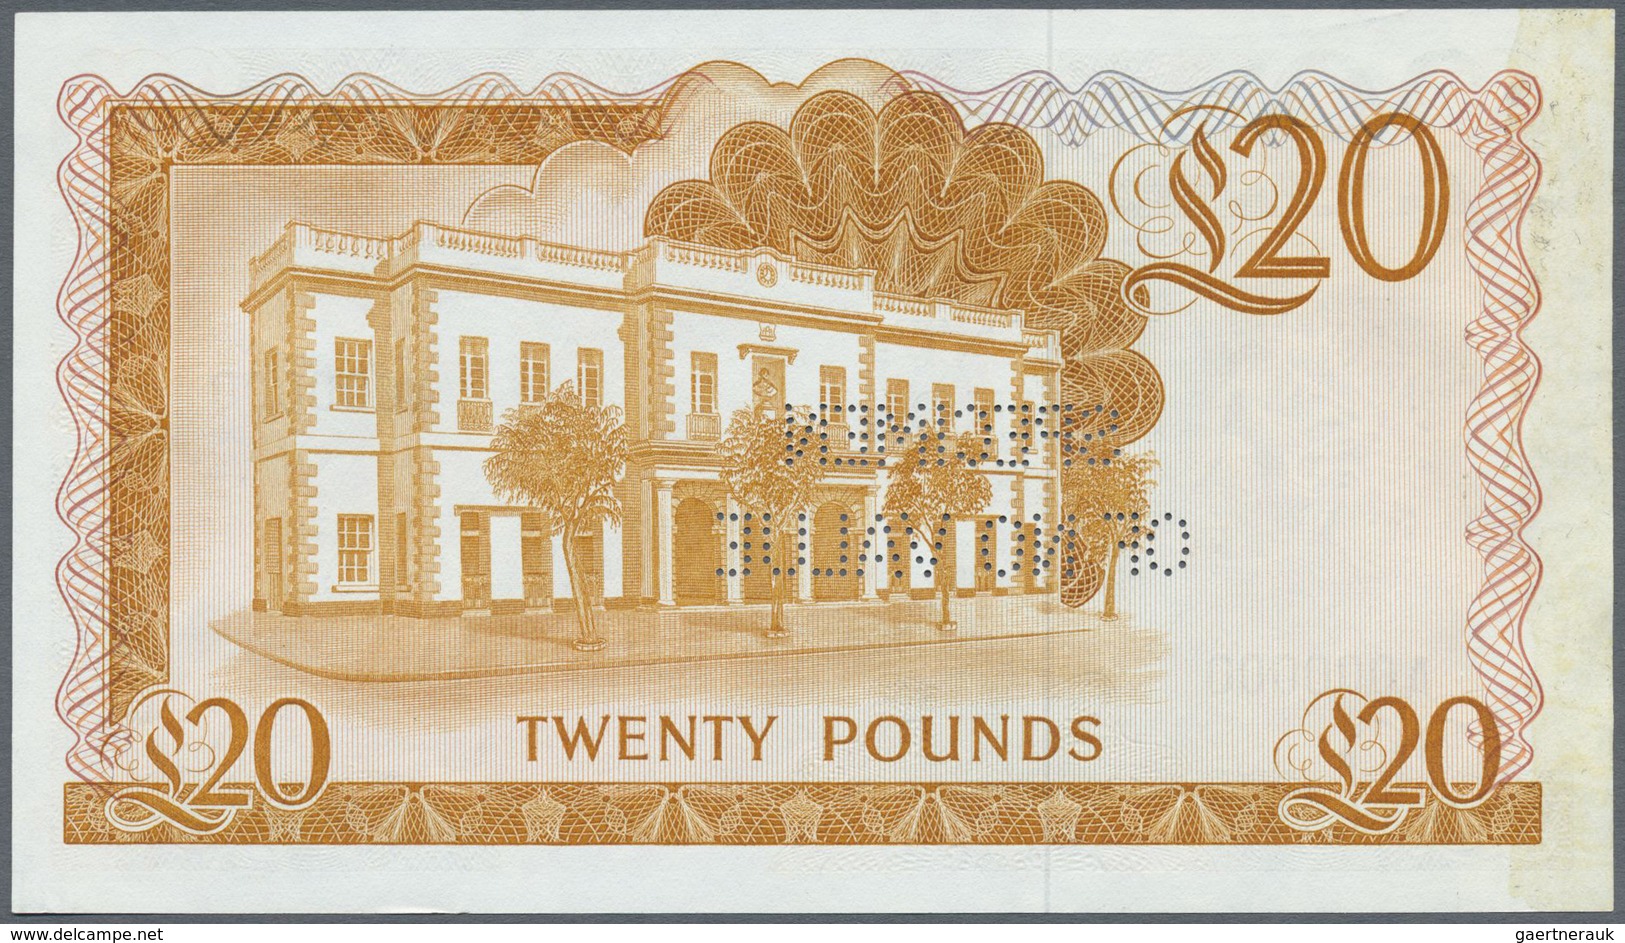 Gibraltar: 20 Pounds Spetember 15th 1979 SPECIMEN, P.23bs In Perfect UNC Condition - Gibraltar